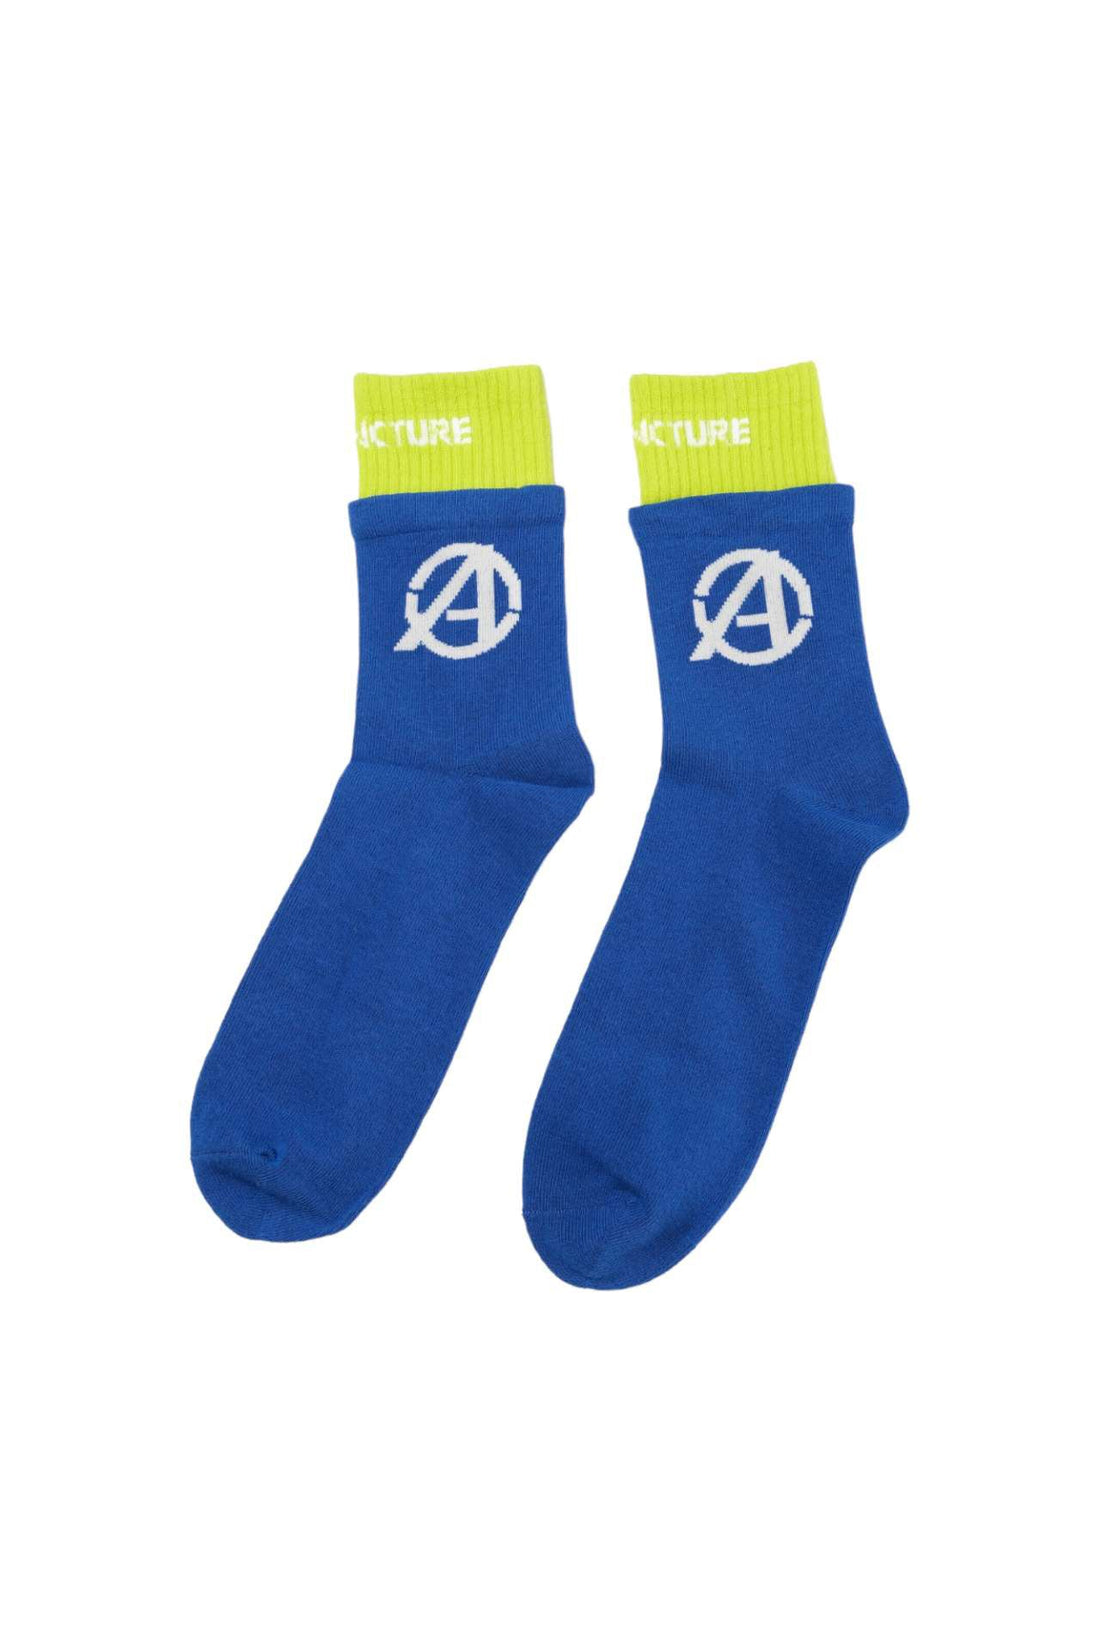 ACU SOCKS TWO-TONED BLUE/GREEN Acupuncture